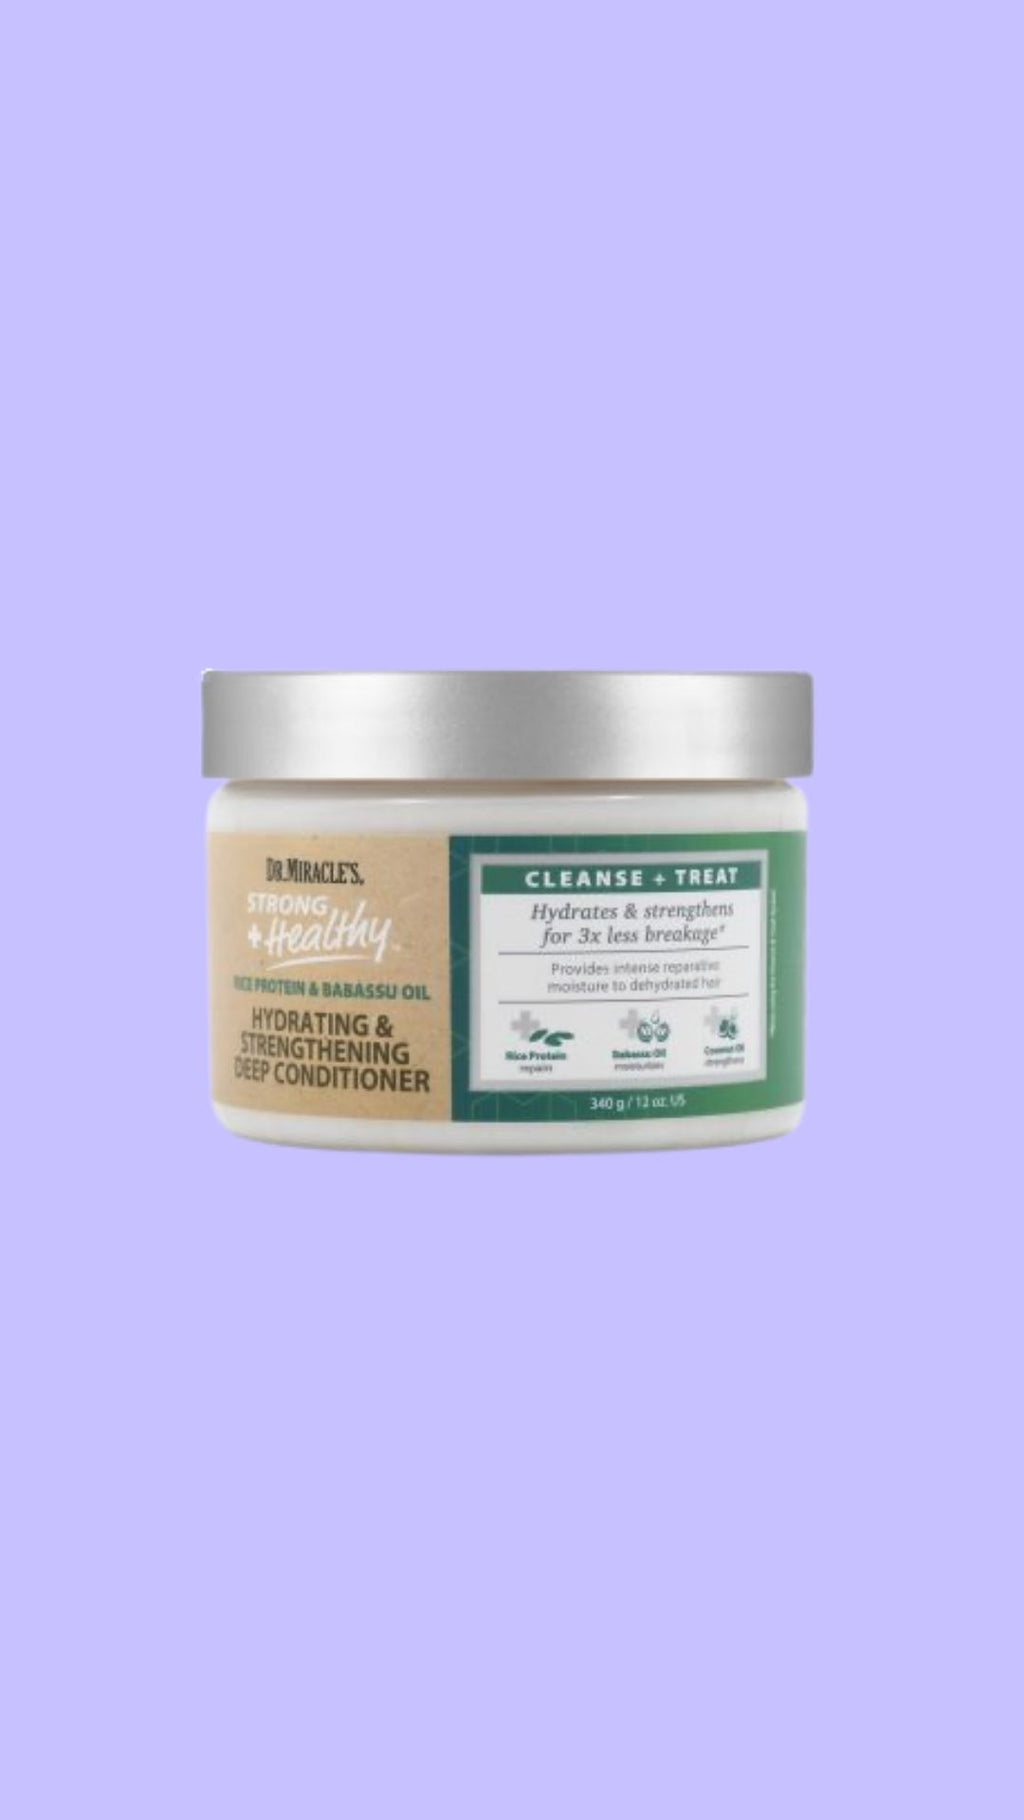 DR. MIRACLE’S HYDRATING & STRENGTHENING DEEP MASQUE